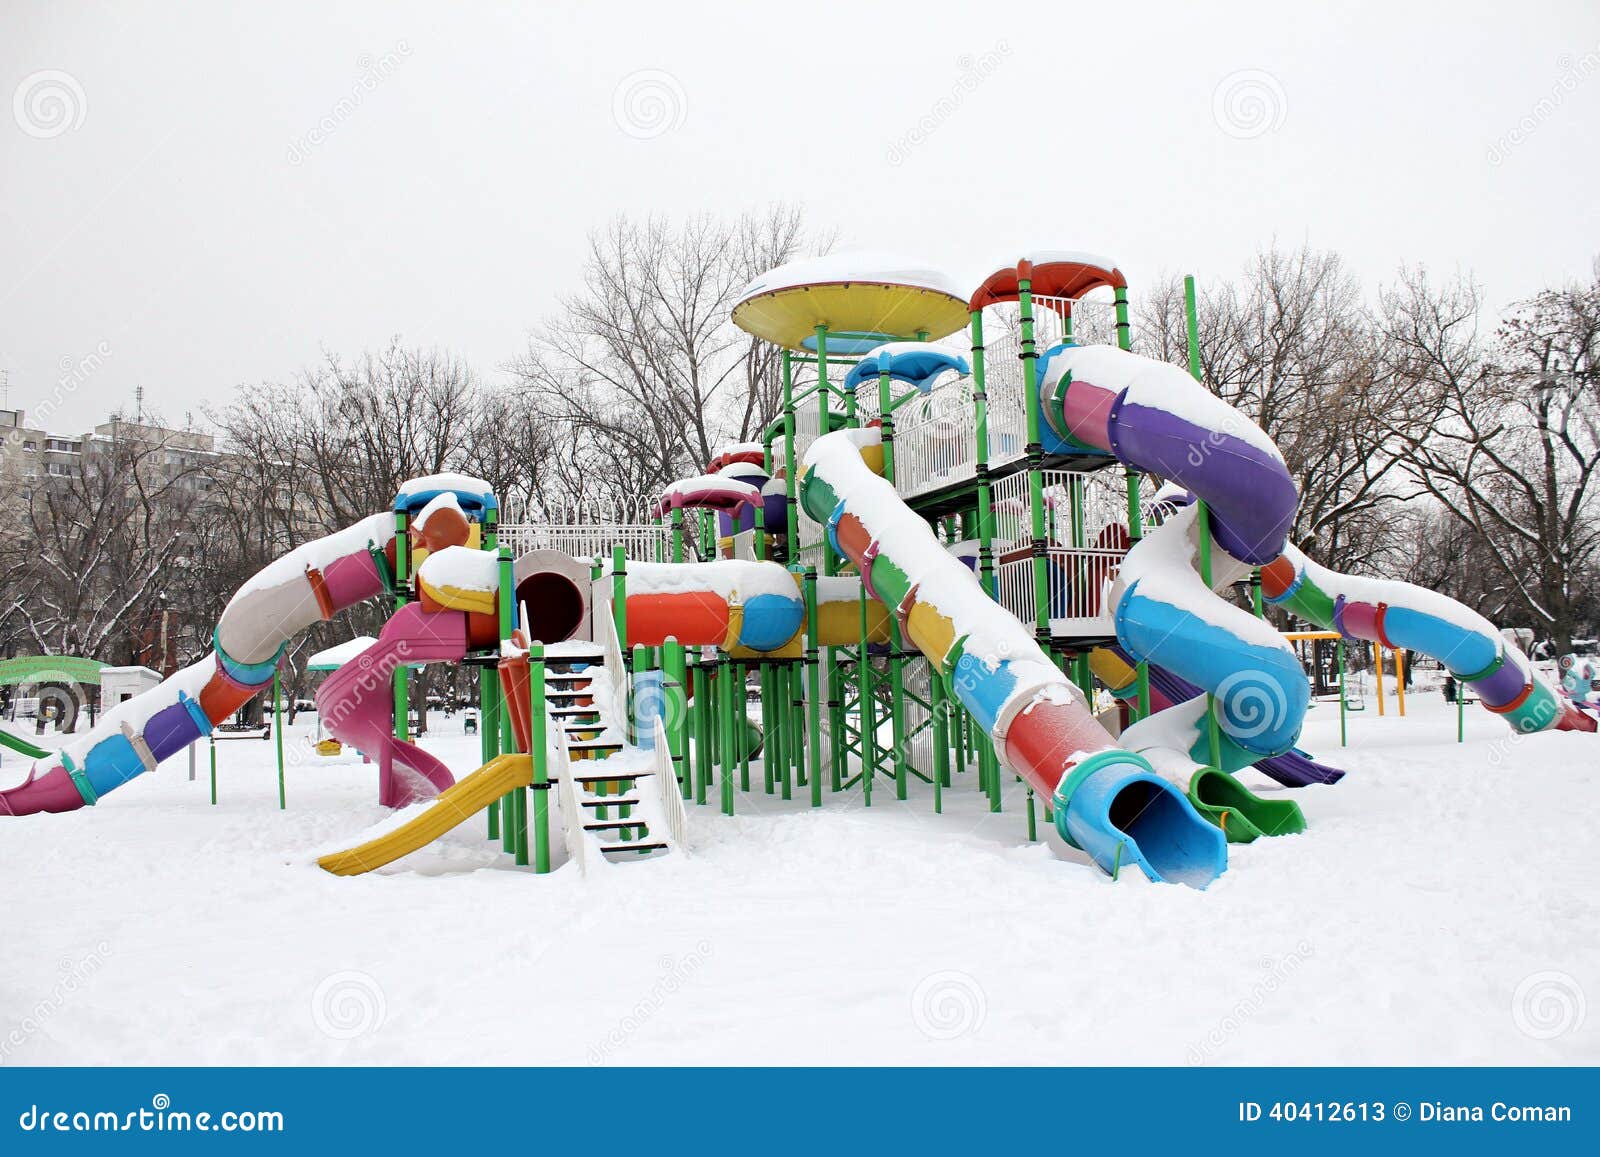 outdoor toys for winter